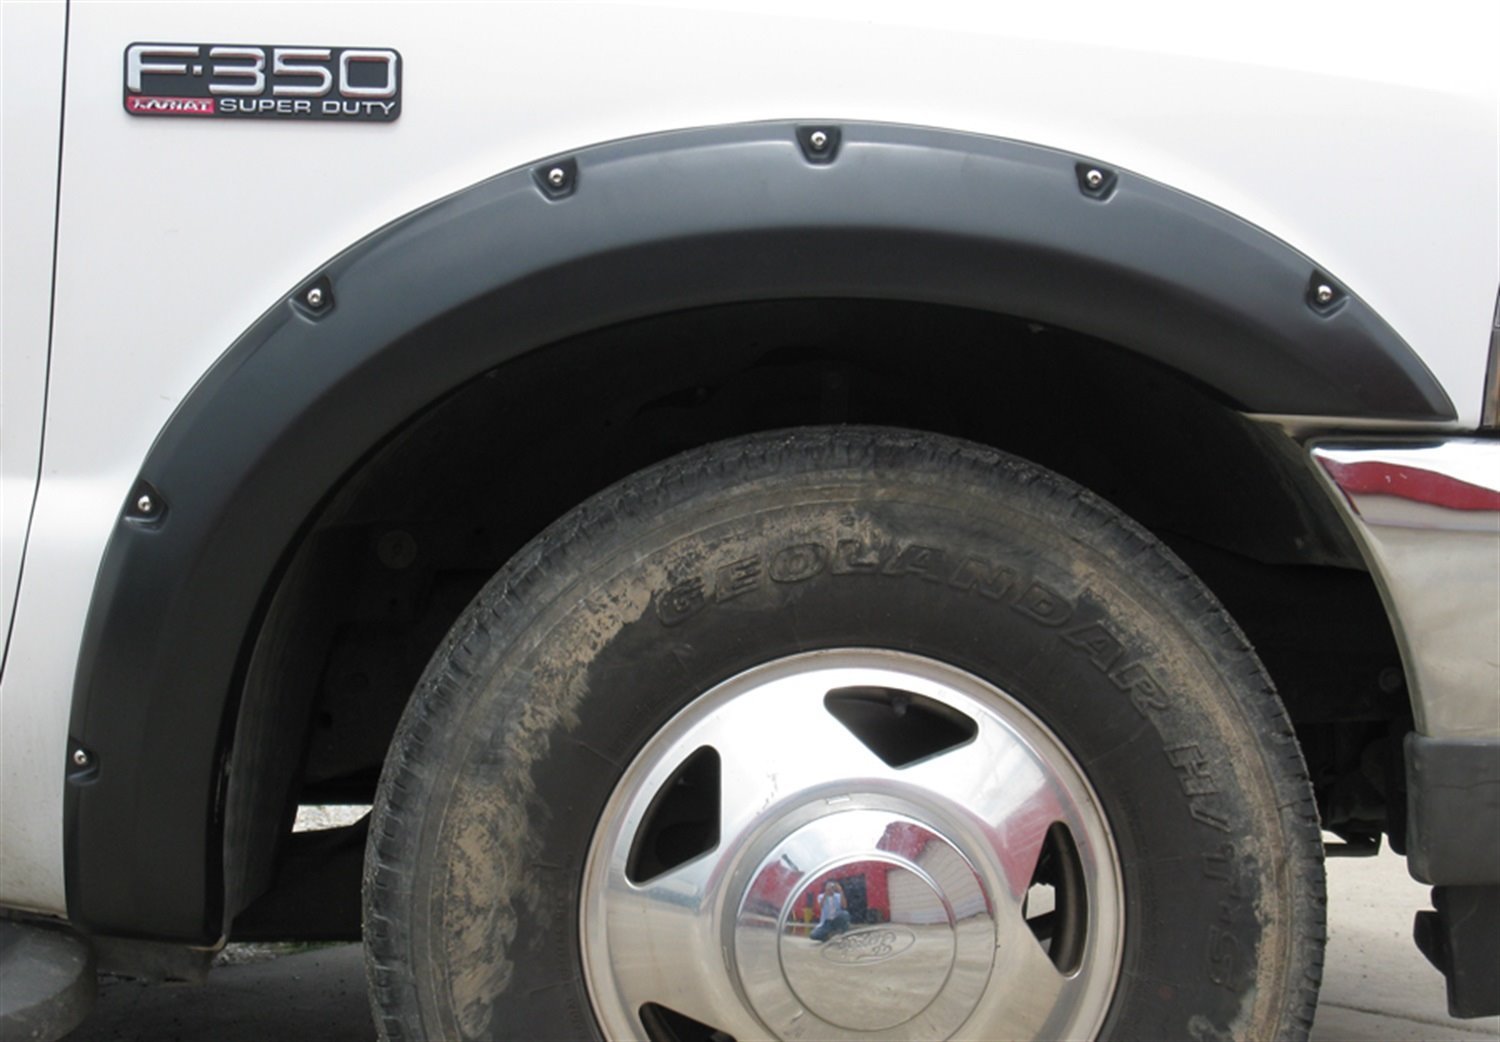 RX Rivet-Style Fender Flares 1999-2007 Ford F-250 Super Duty